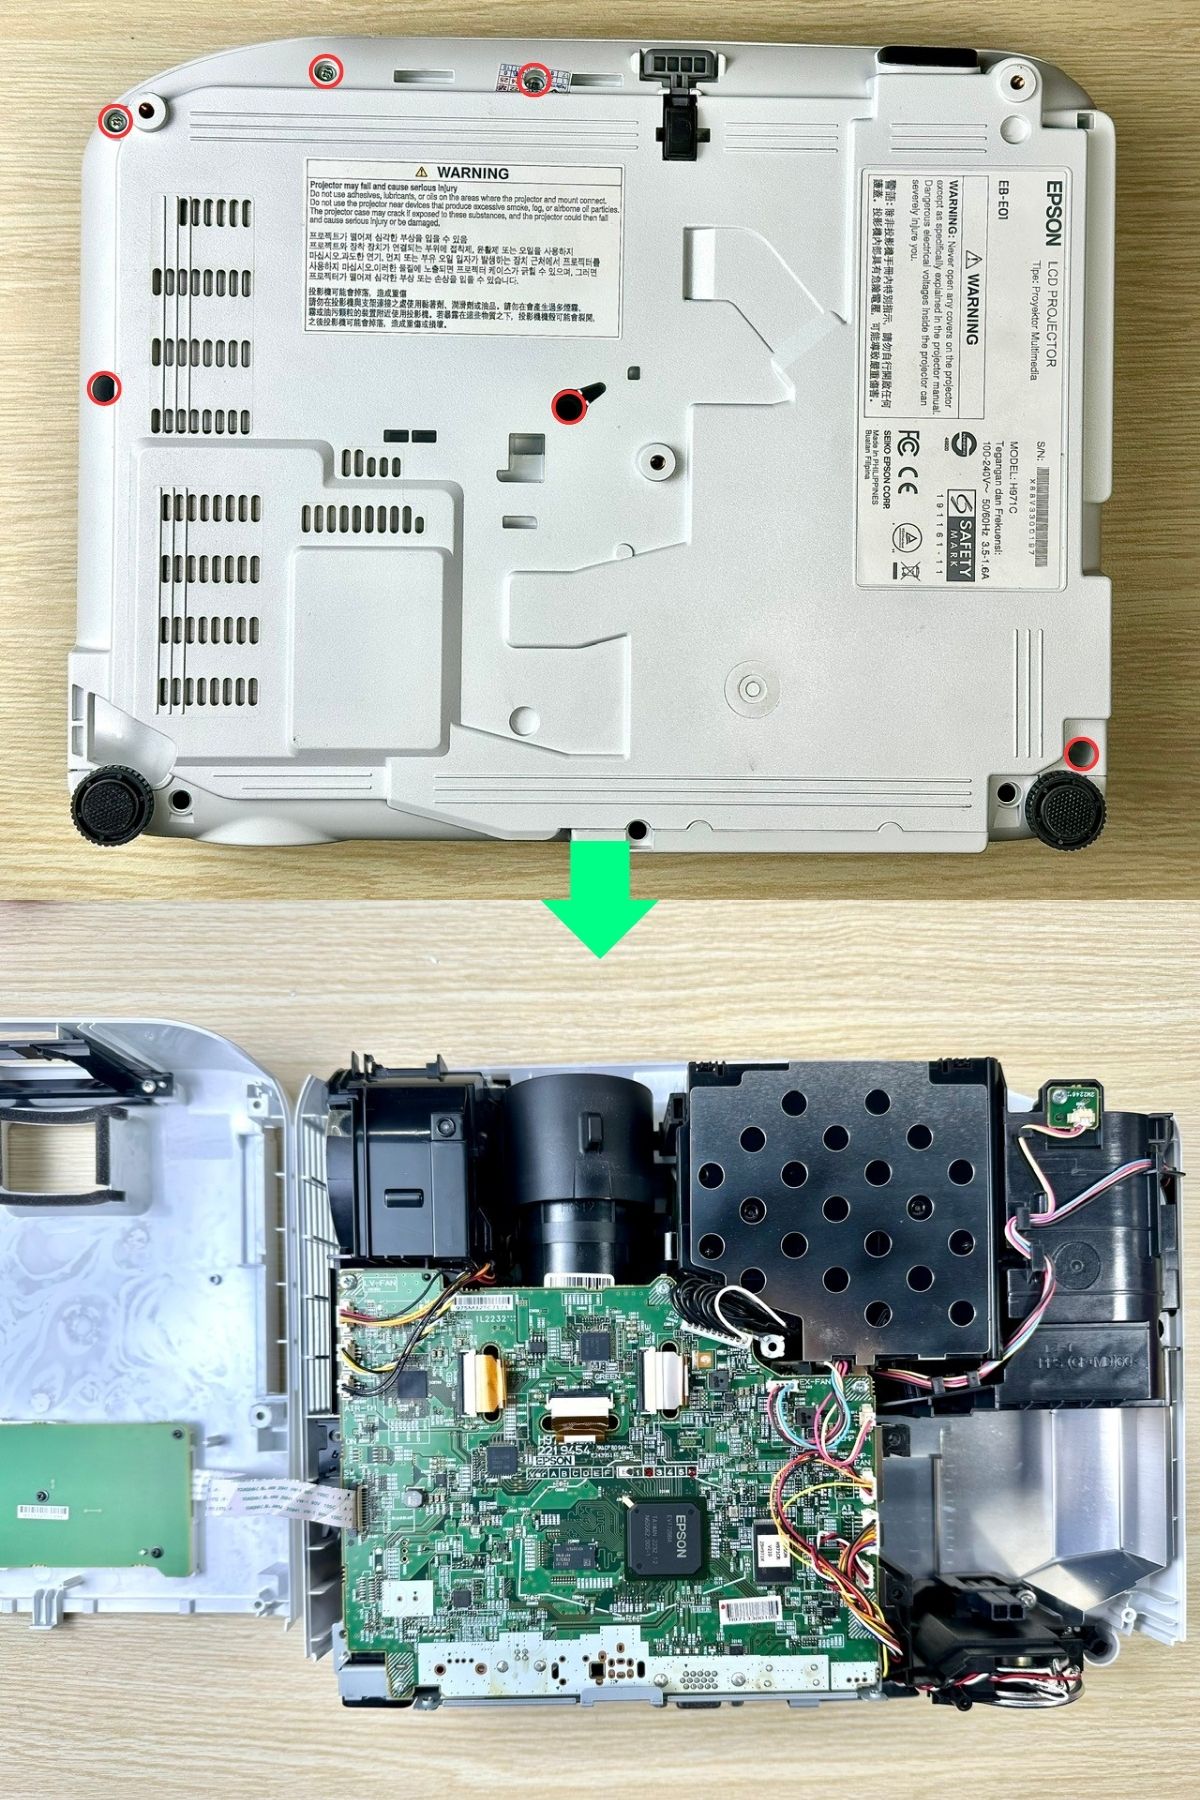 remove the bottom screws & top case of an epson projector